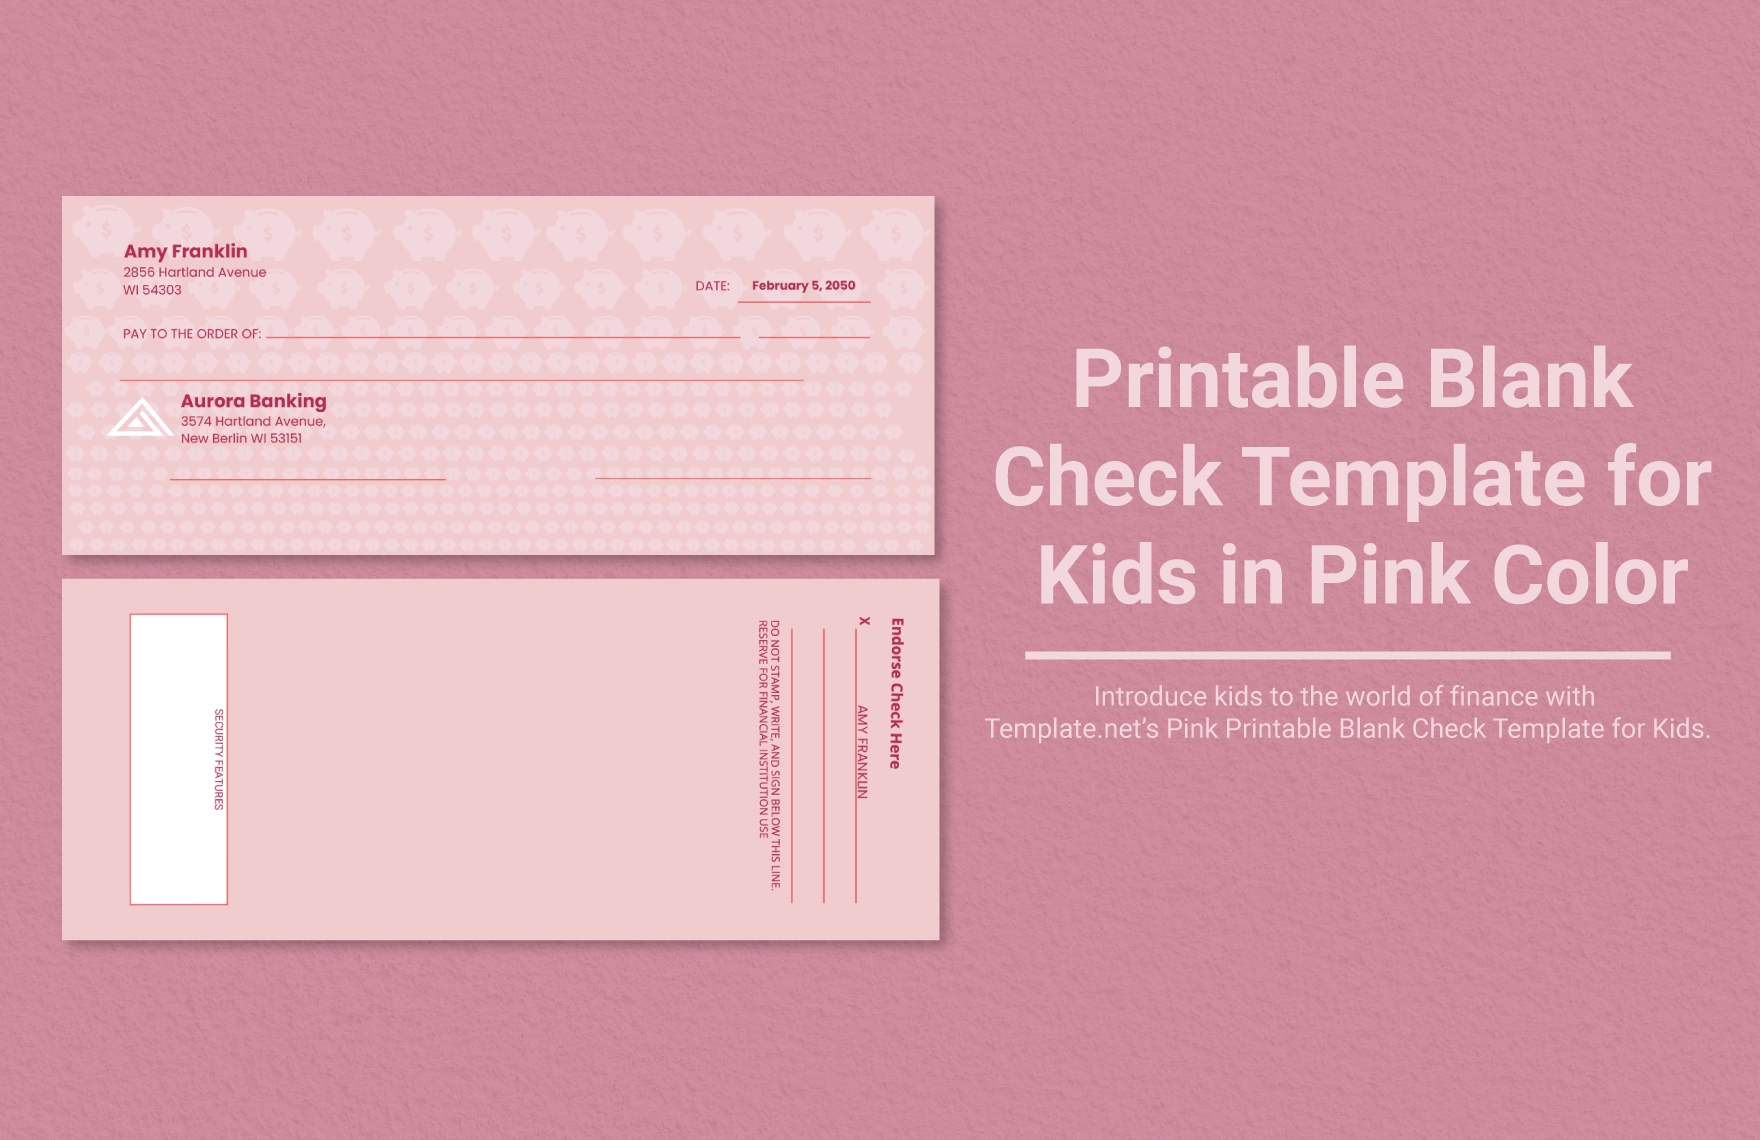 printable blank check template for kids in pink color